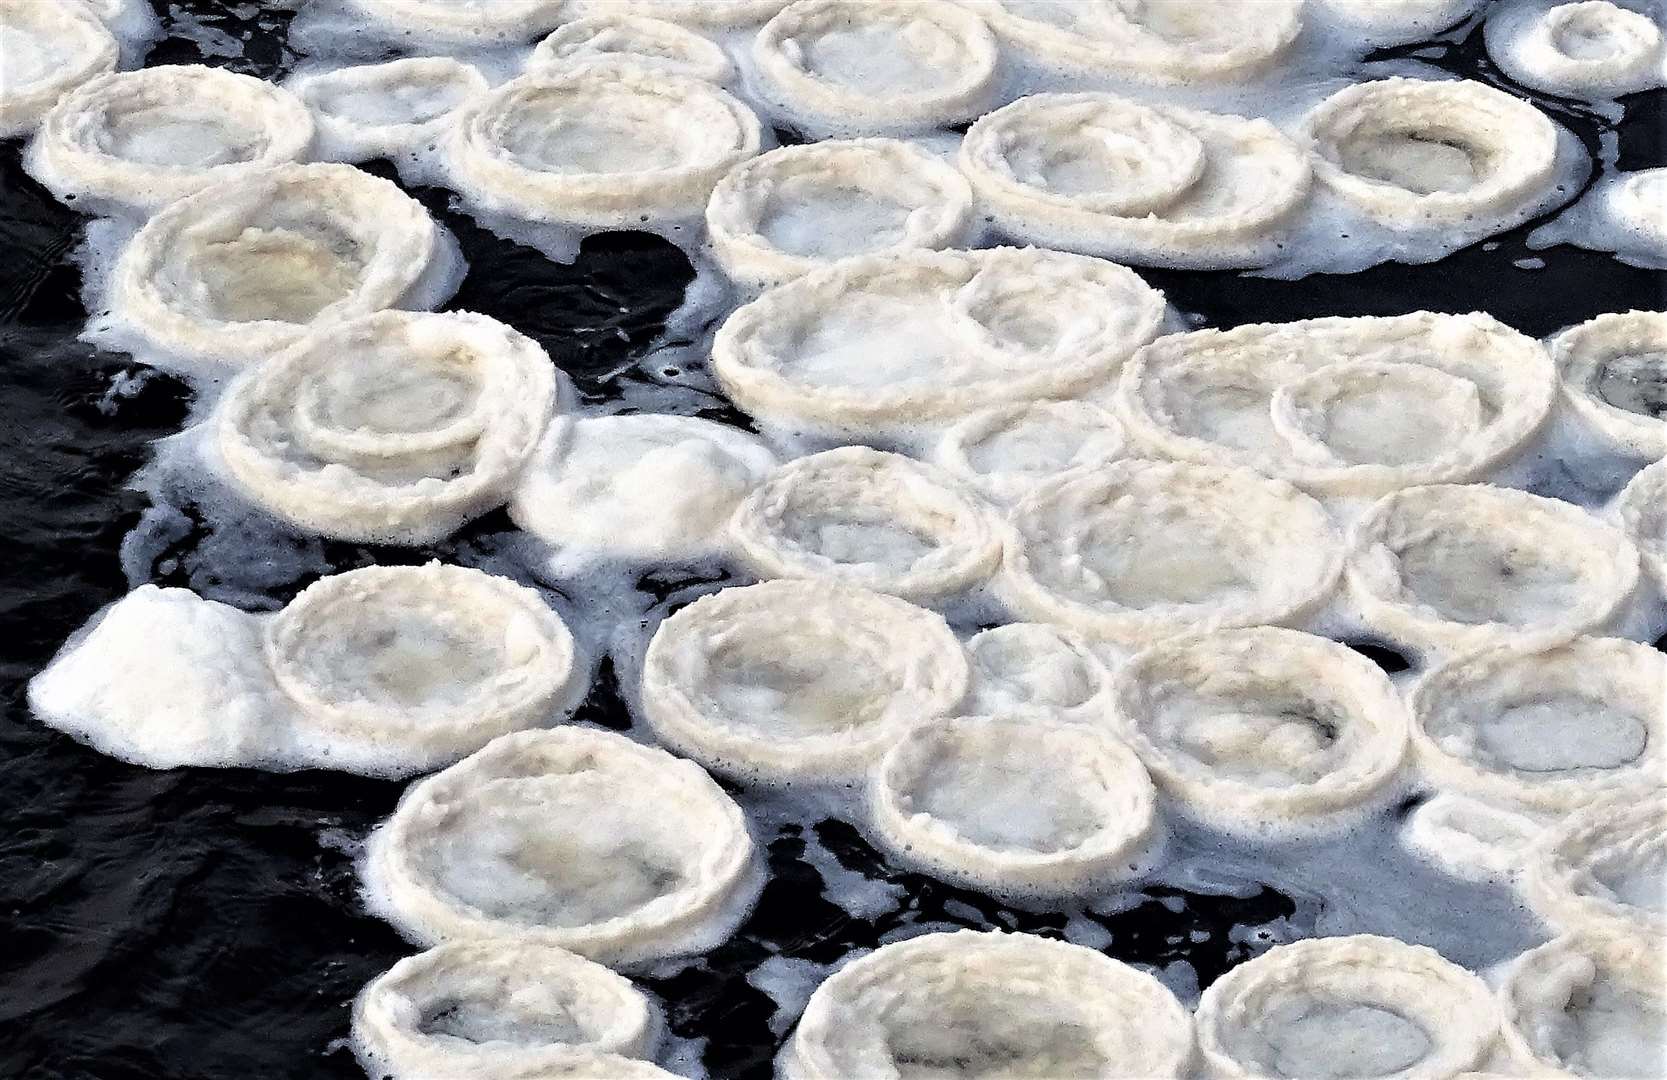 The rare phenomenon can lead to many ice pancakes accumulating in areas where there is water movement and subzero temperatures. The icy discs have also been compared to lily pads.